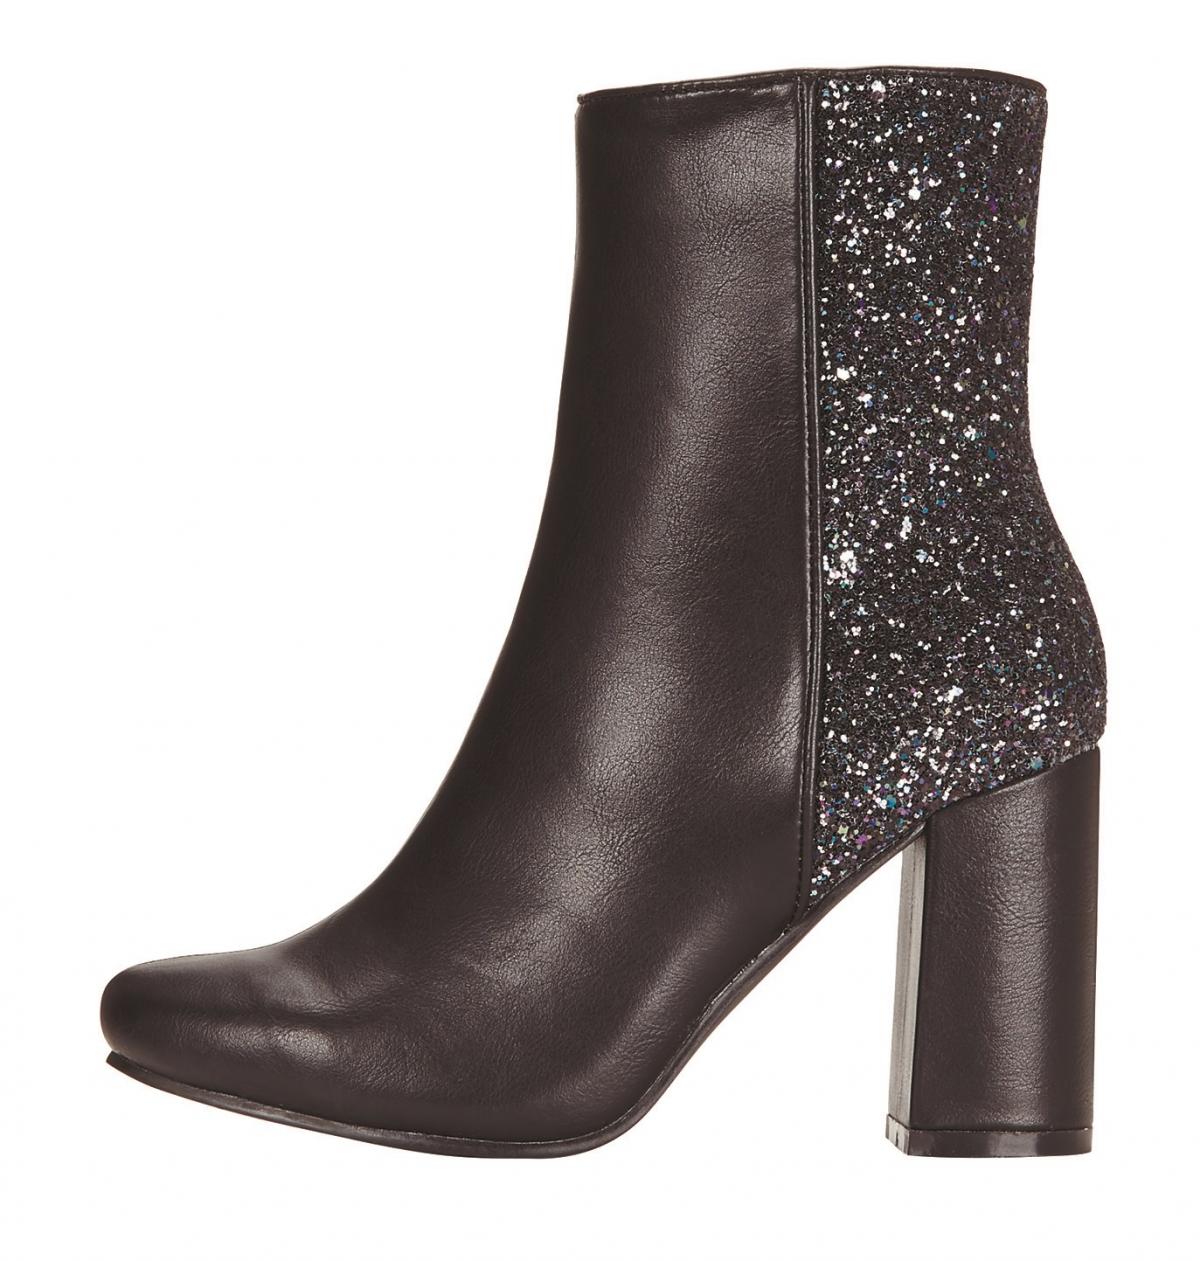 V by Very, Glitter Back High Ankle Boot Black, £35